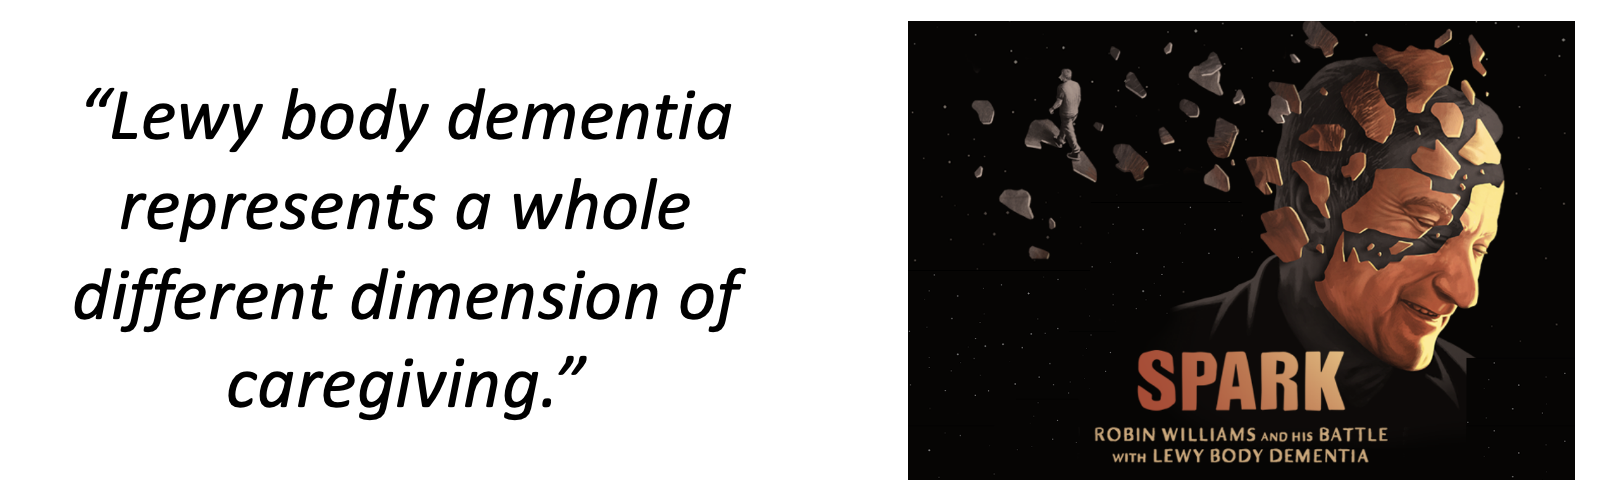 Quote: Lewy body dementia represents a whole different dimension of caregiving.